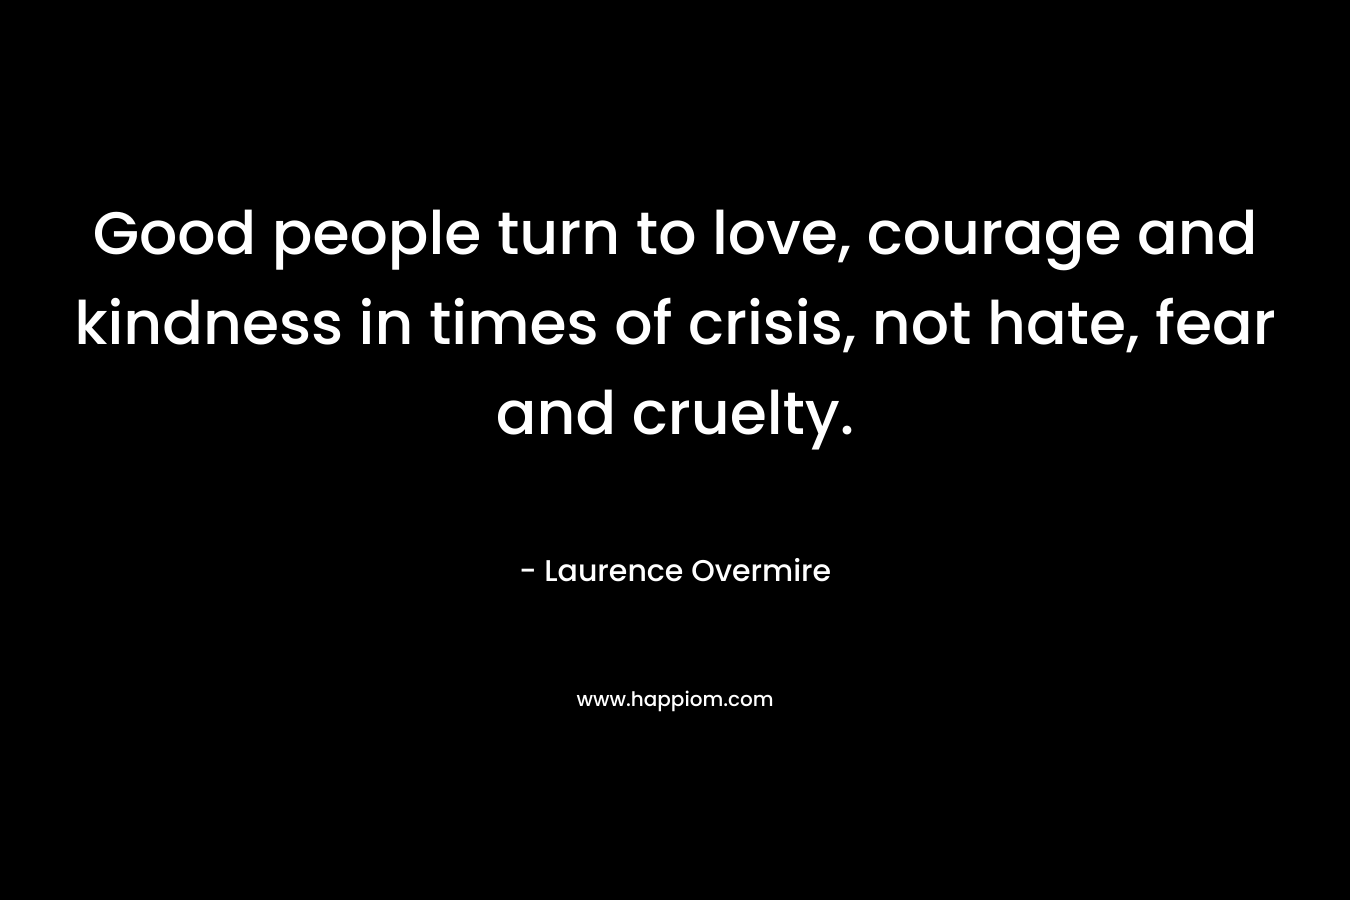 Good people turn to love, courage and kindness in times of crisis, not hate, fear and cruelty.